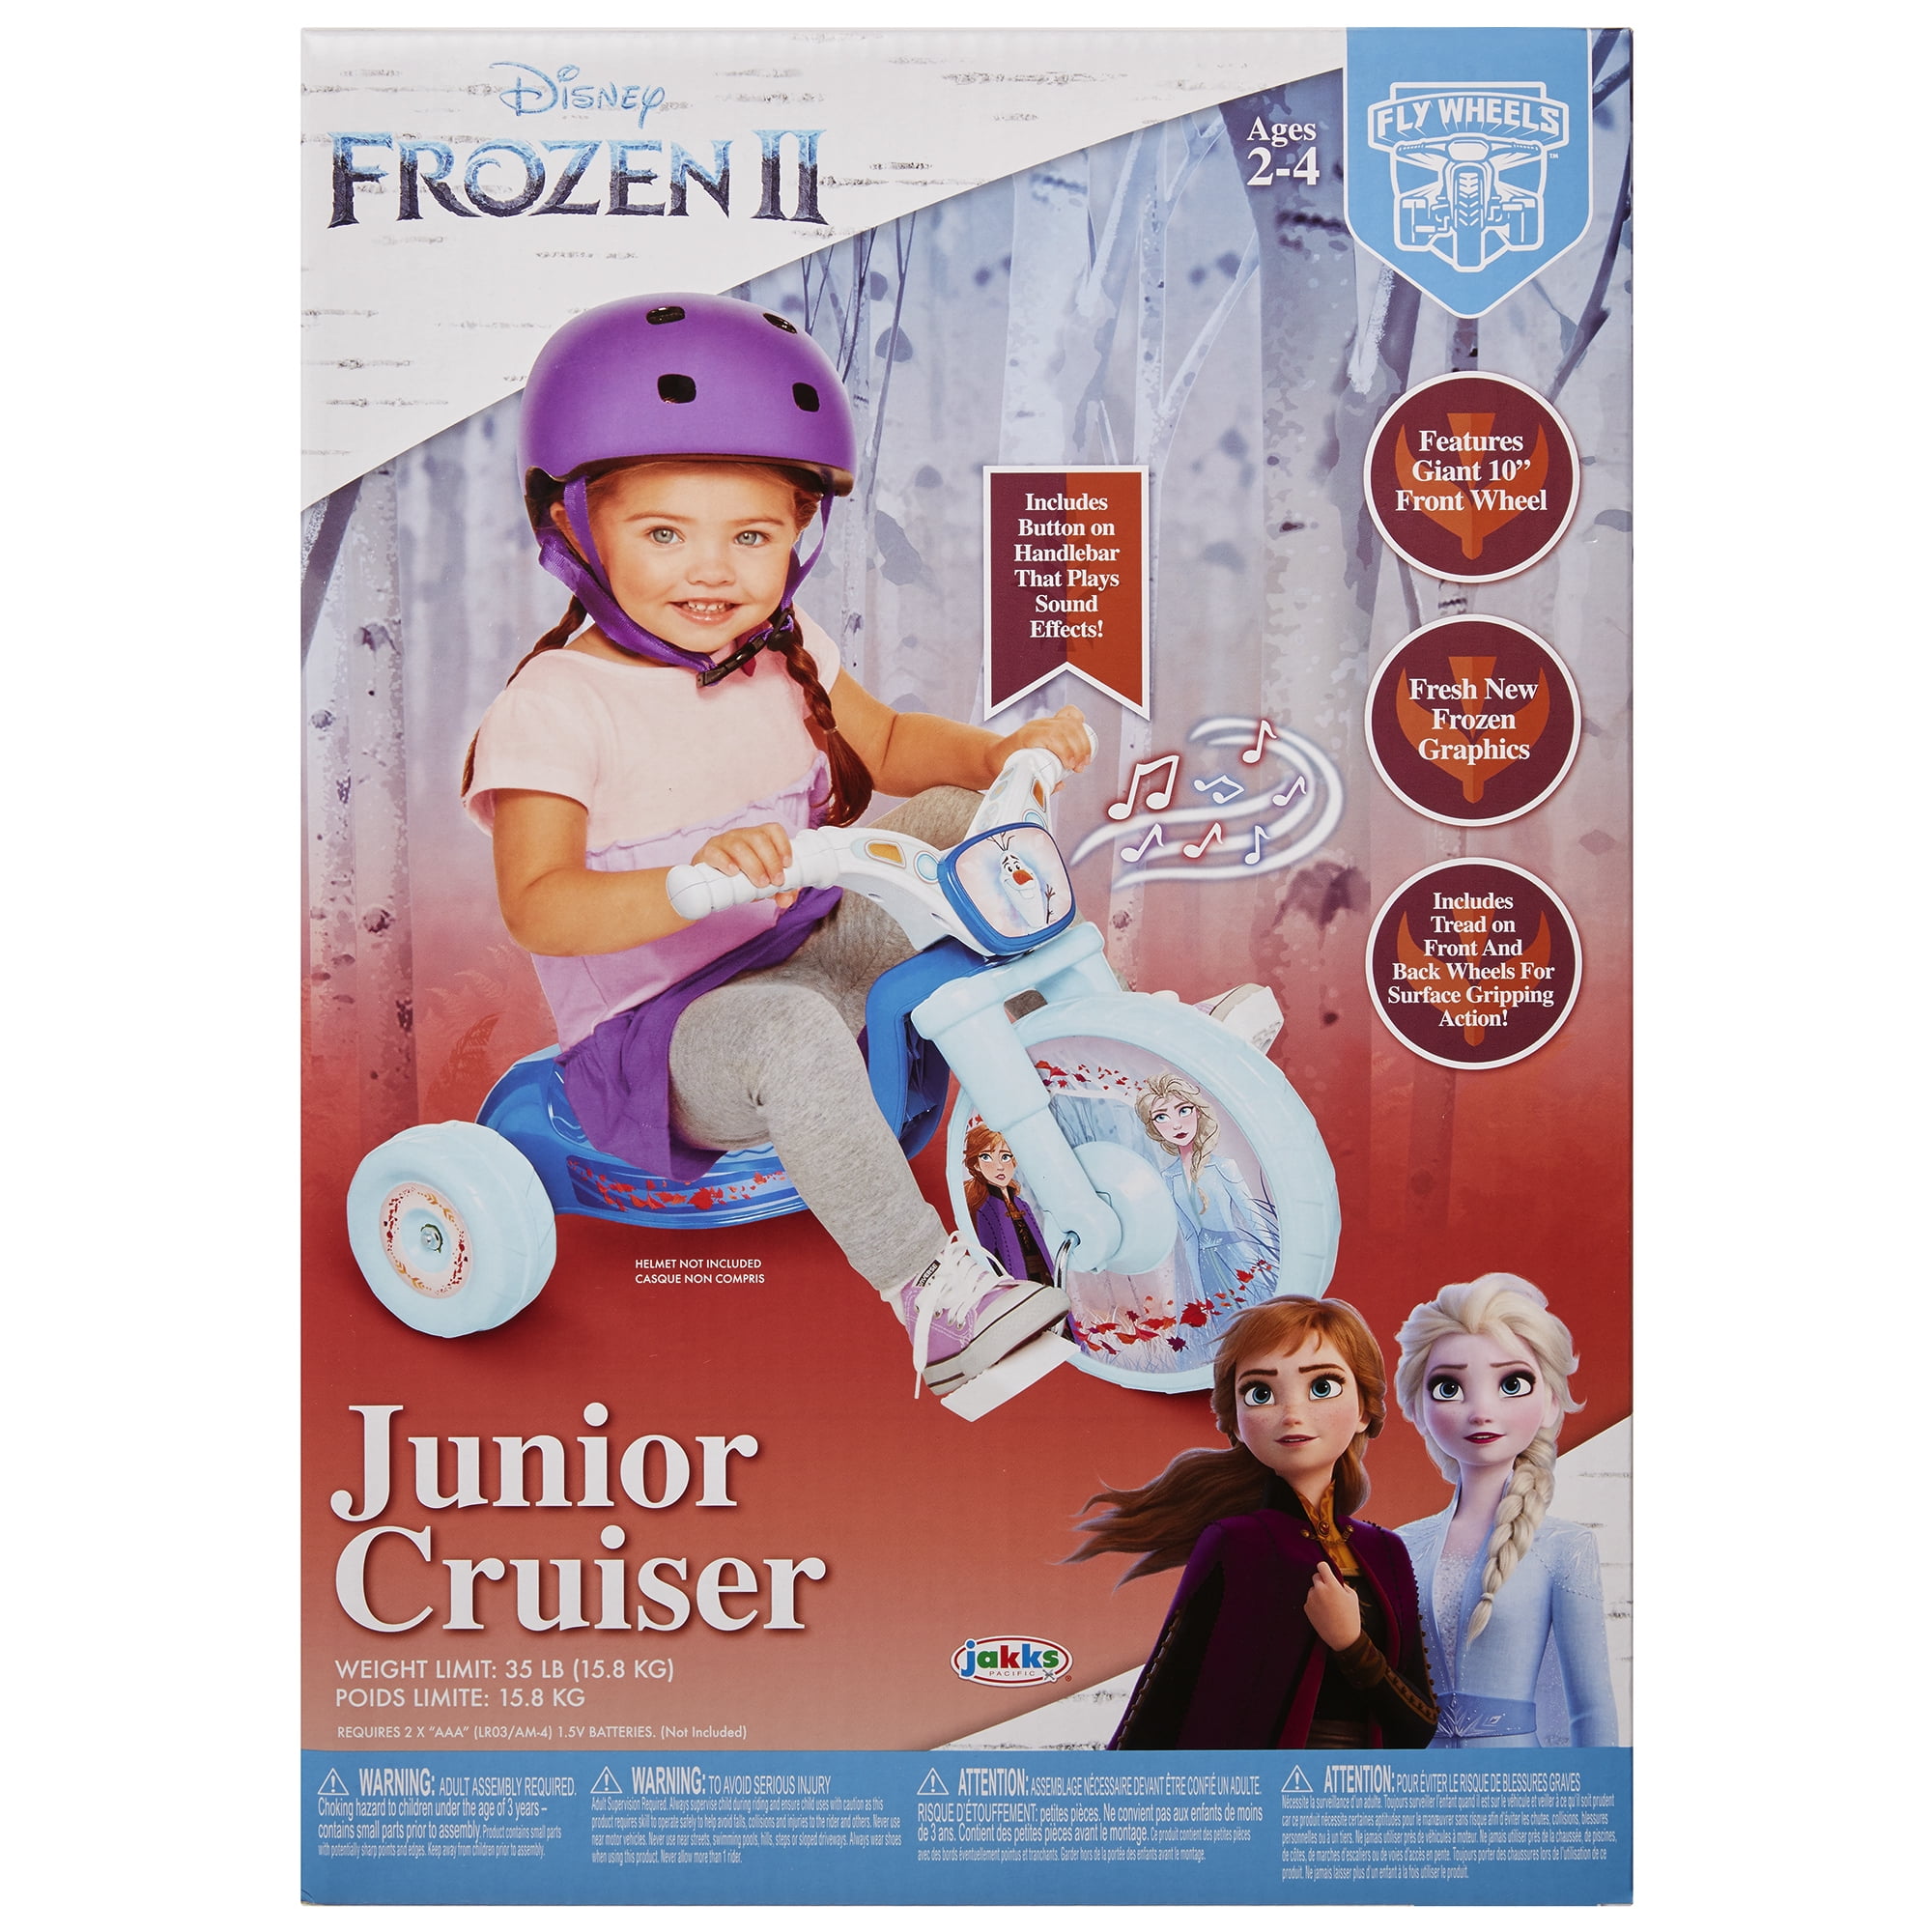 Ages 2-4 14.25 X 14.5 X 23.5 Blue/Purple 6 Lb Frozen Northern Lights 10 Fly Wheels Junior Cruiser Ride-On 